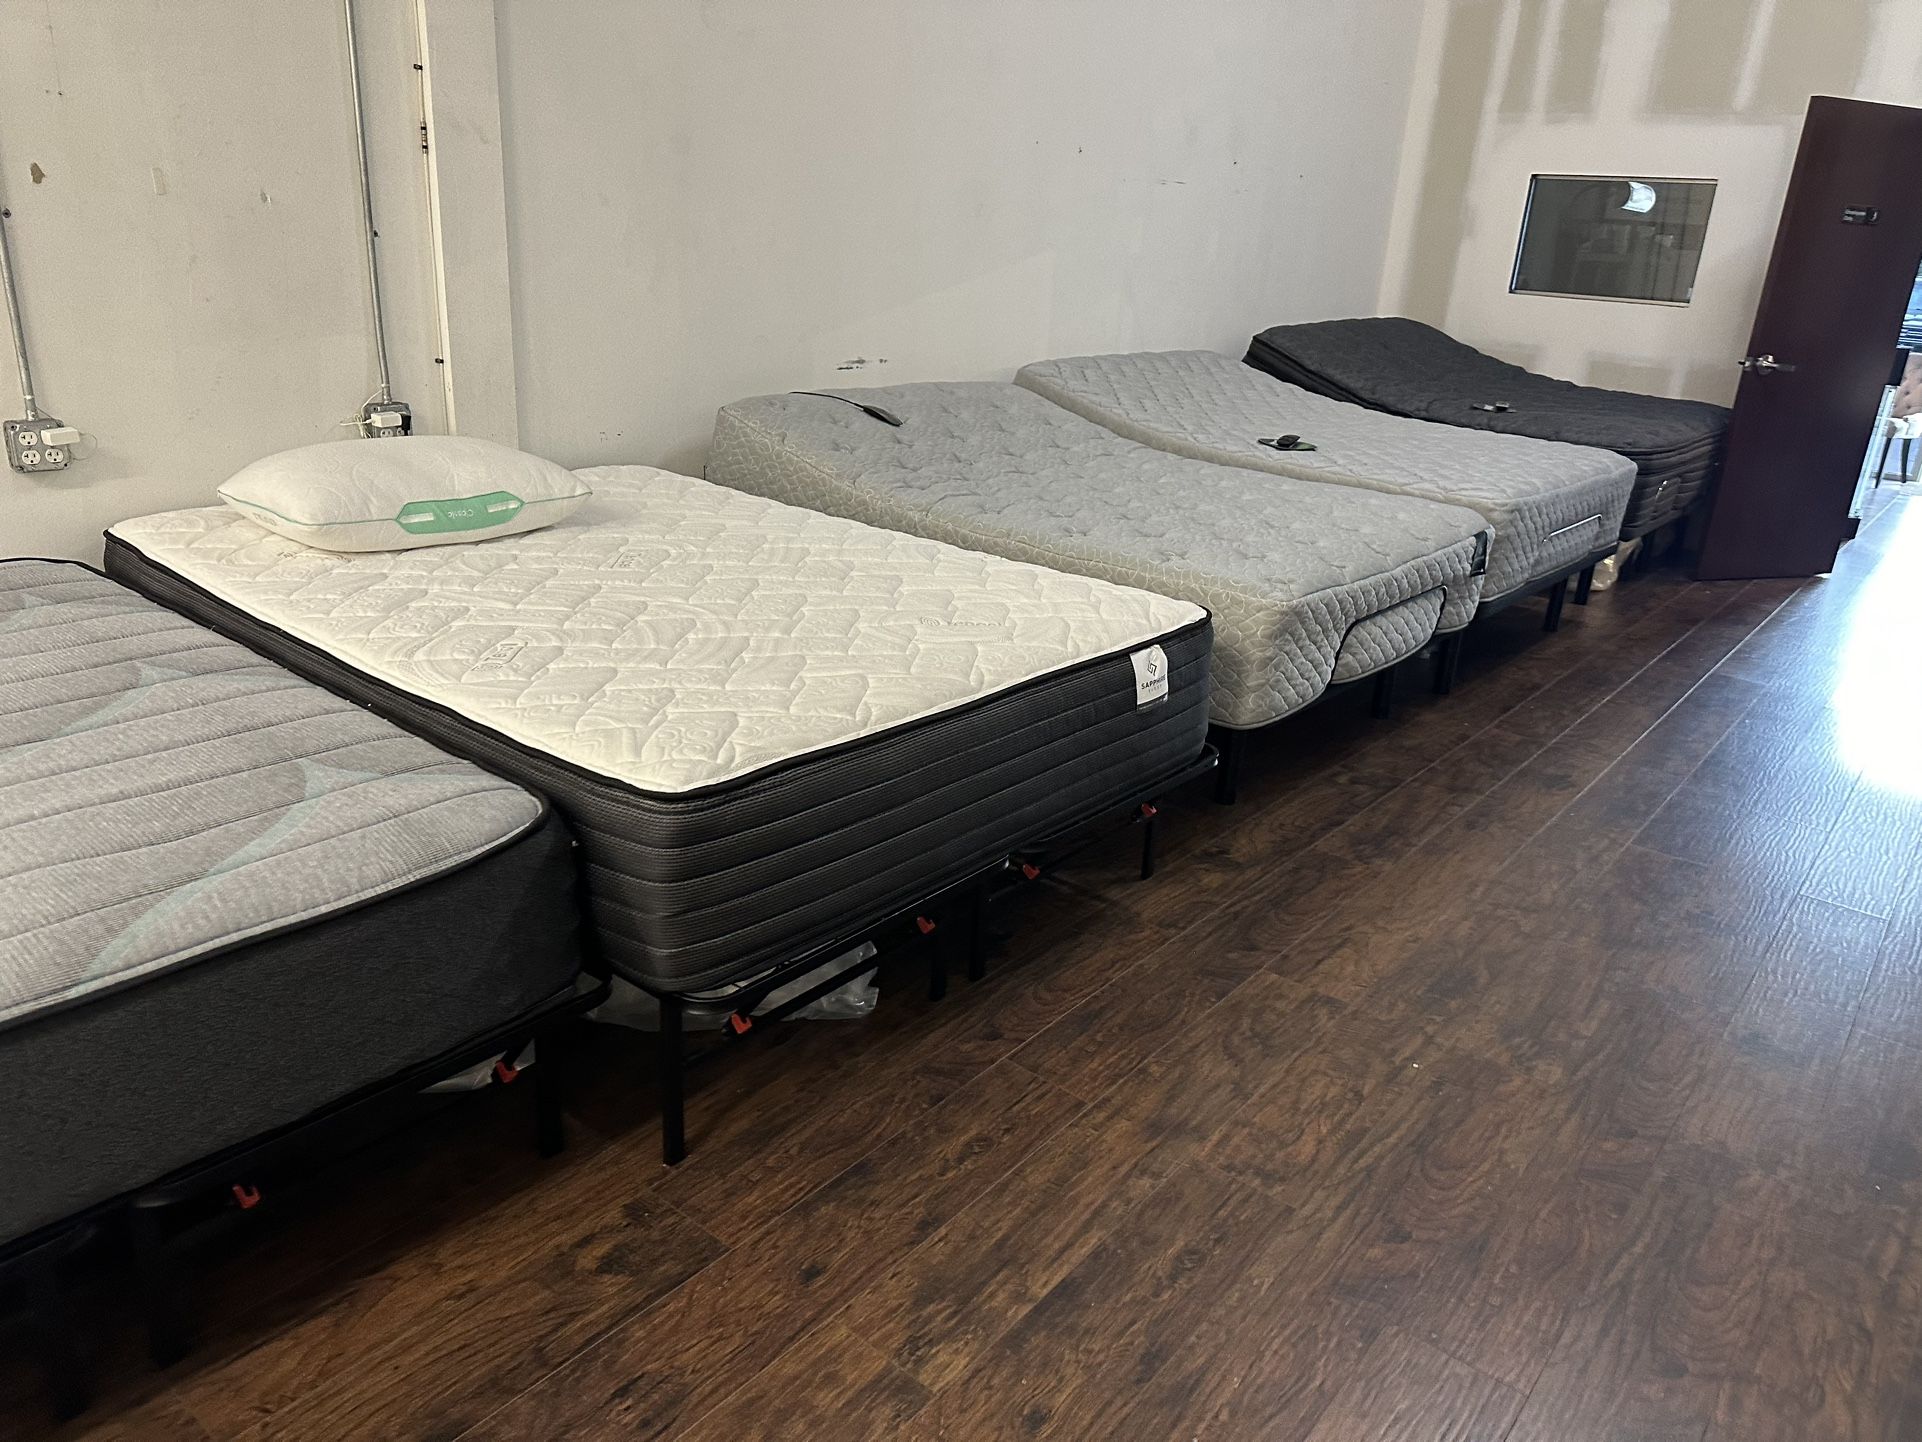 King Mattresses 30-80% Off While Supplies Last!